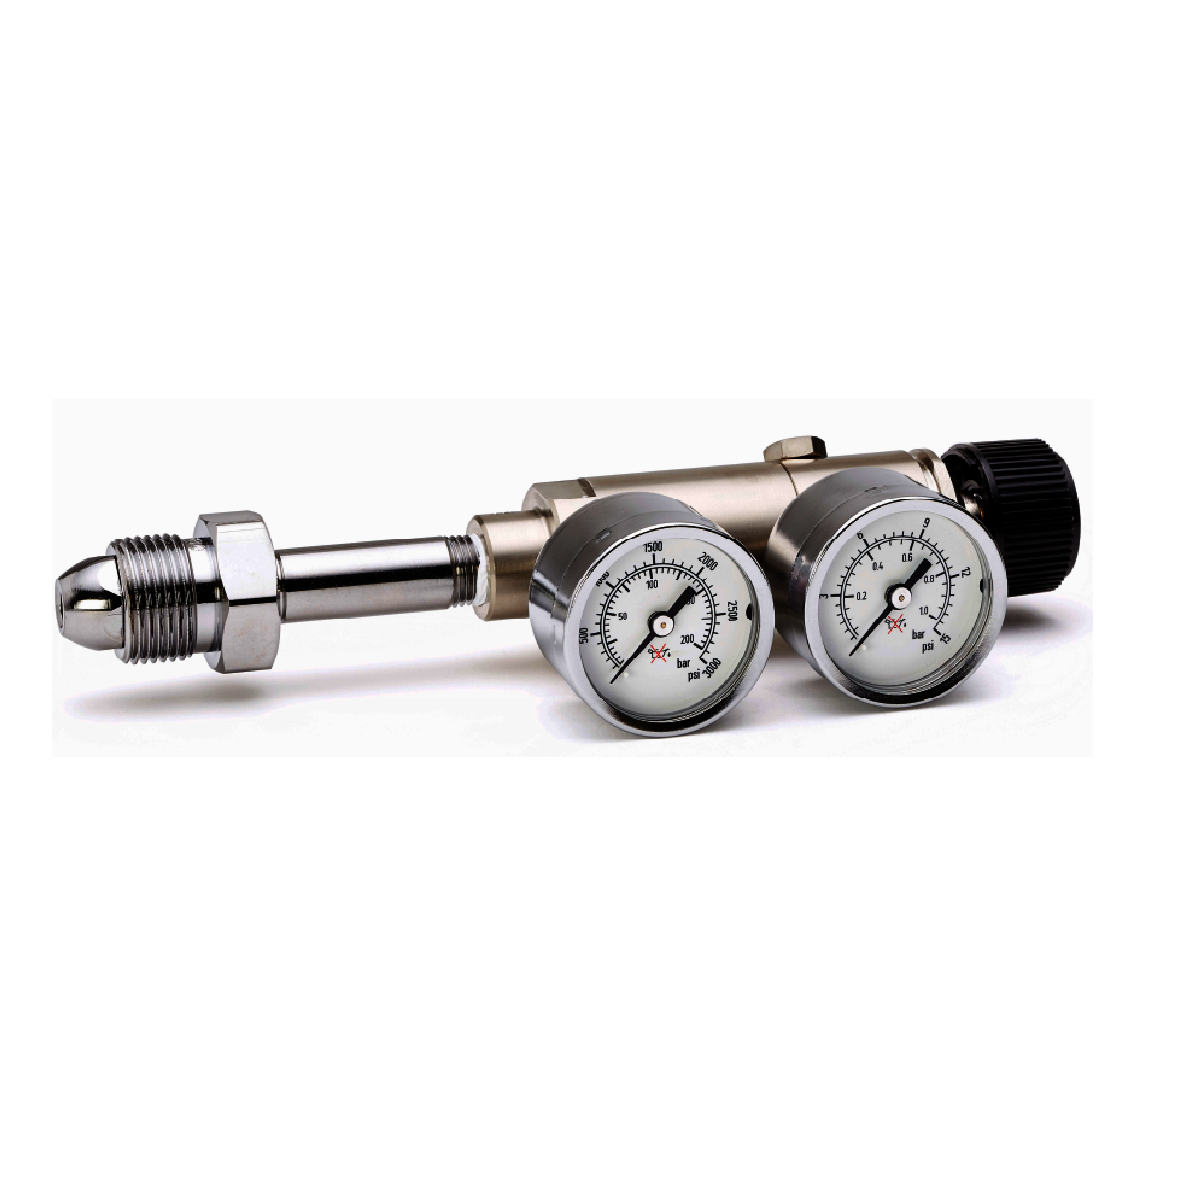 Airgas Model 14 Nickel-Plated Brass High Purity Two Stage Regulator With CGA-540 Connection